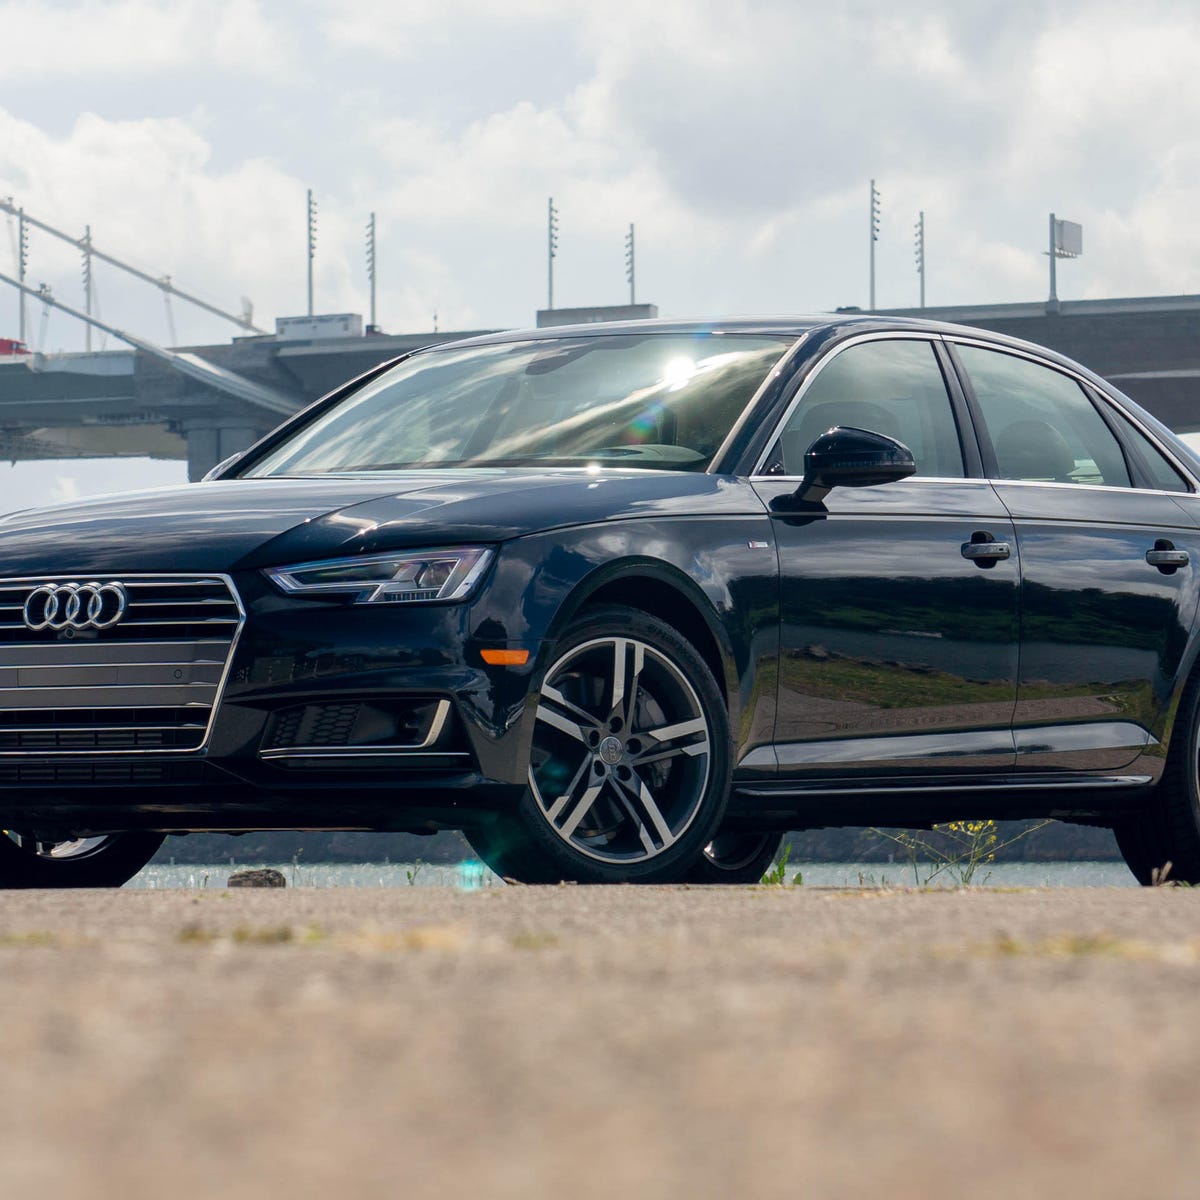 2018 Audi A4 2.0T Quattro sedan review: Best balance of sport and smarts -  CNET